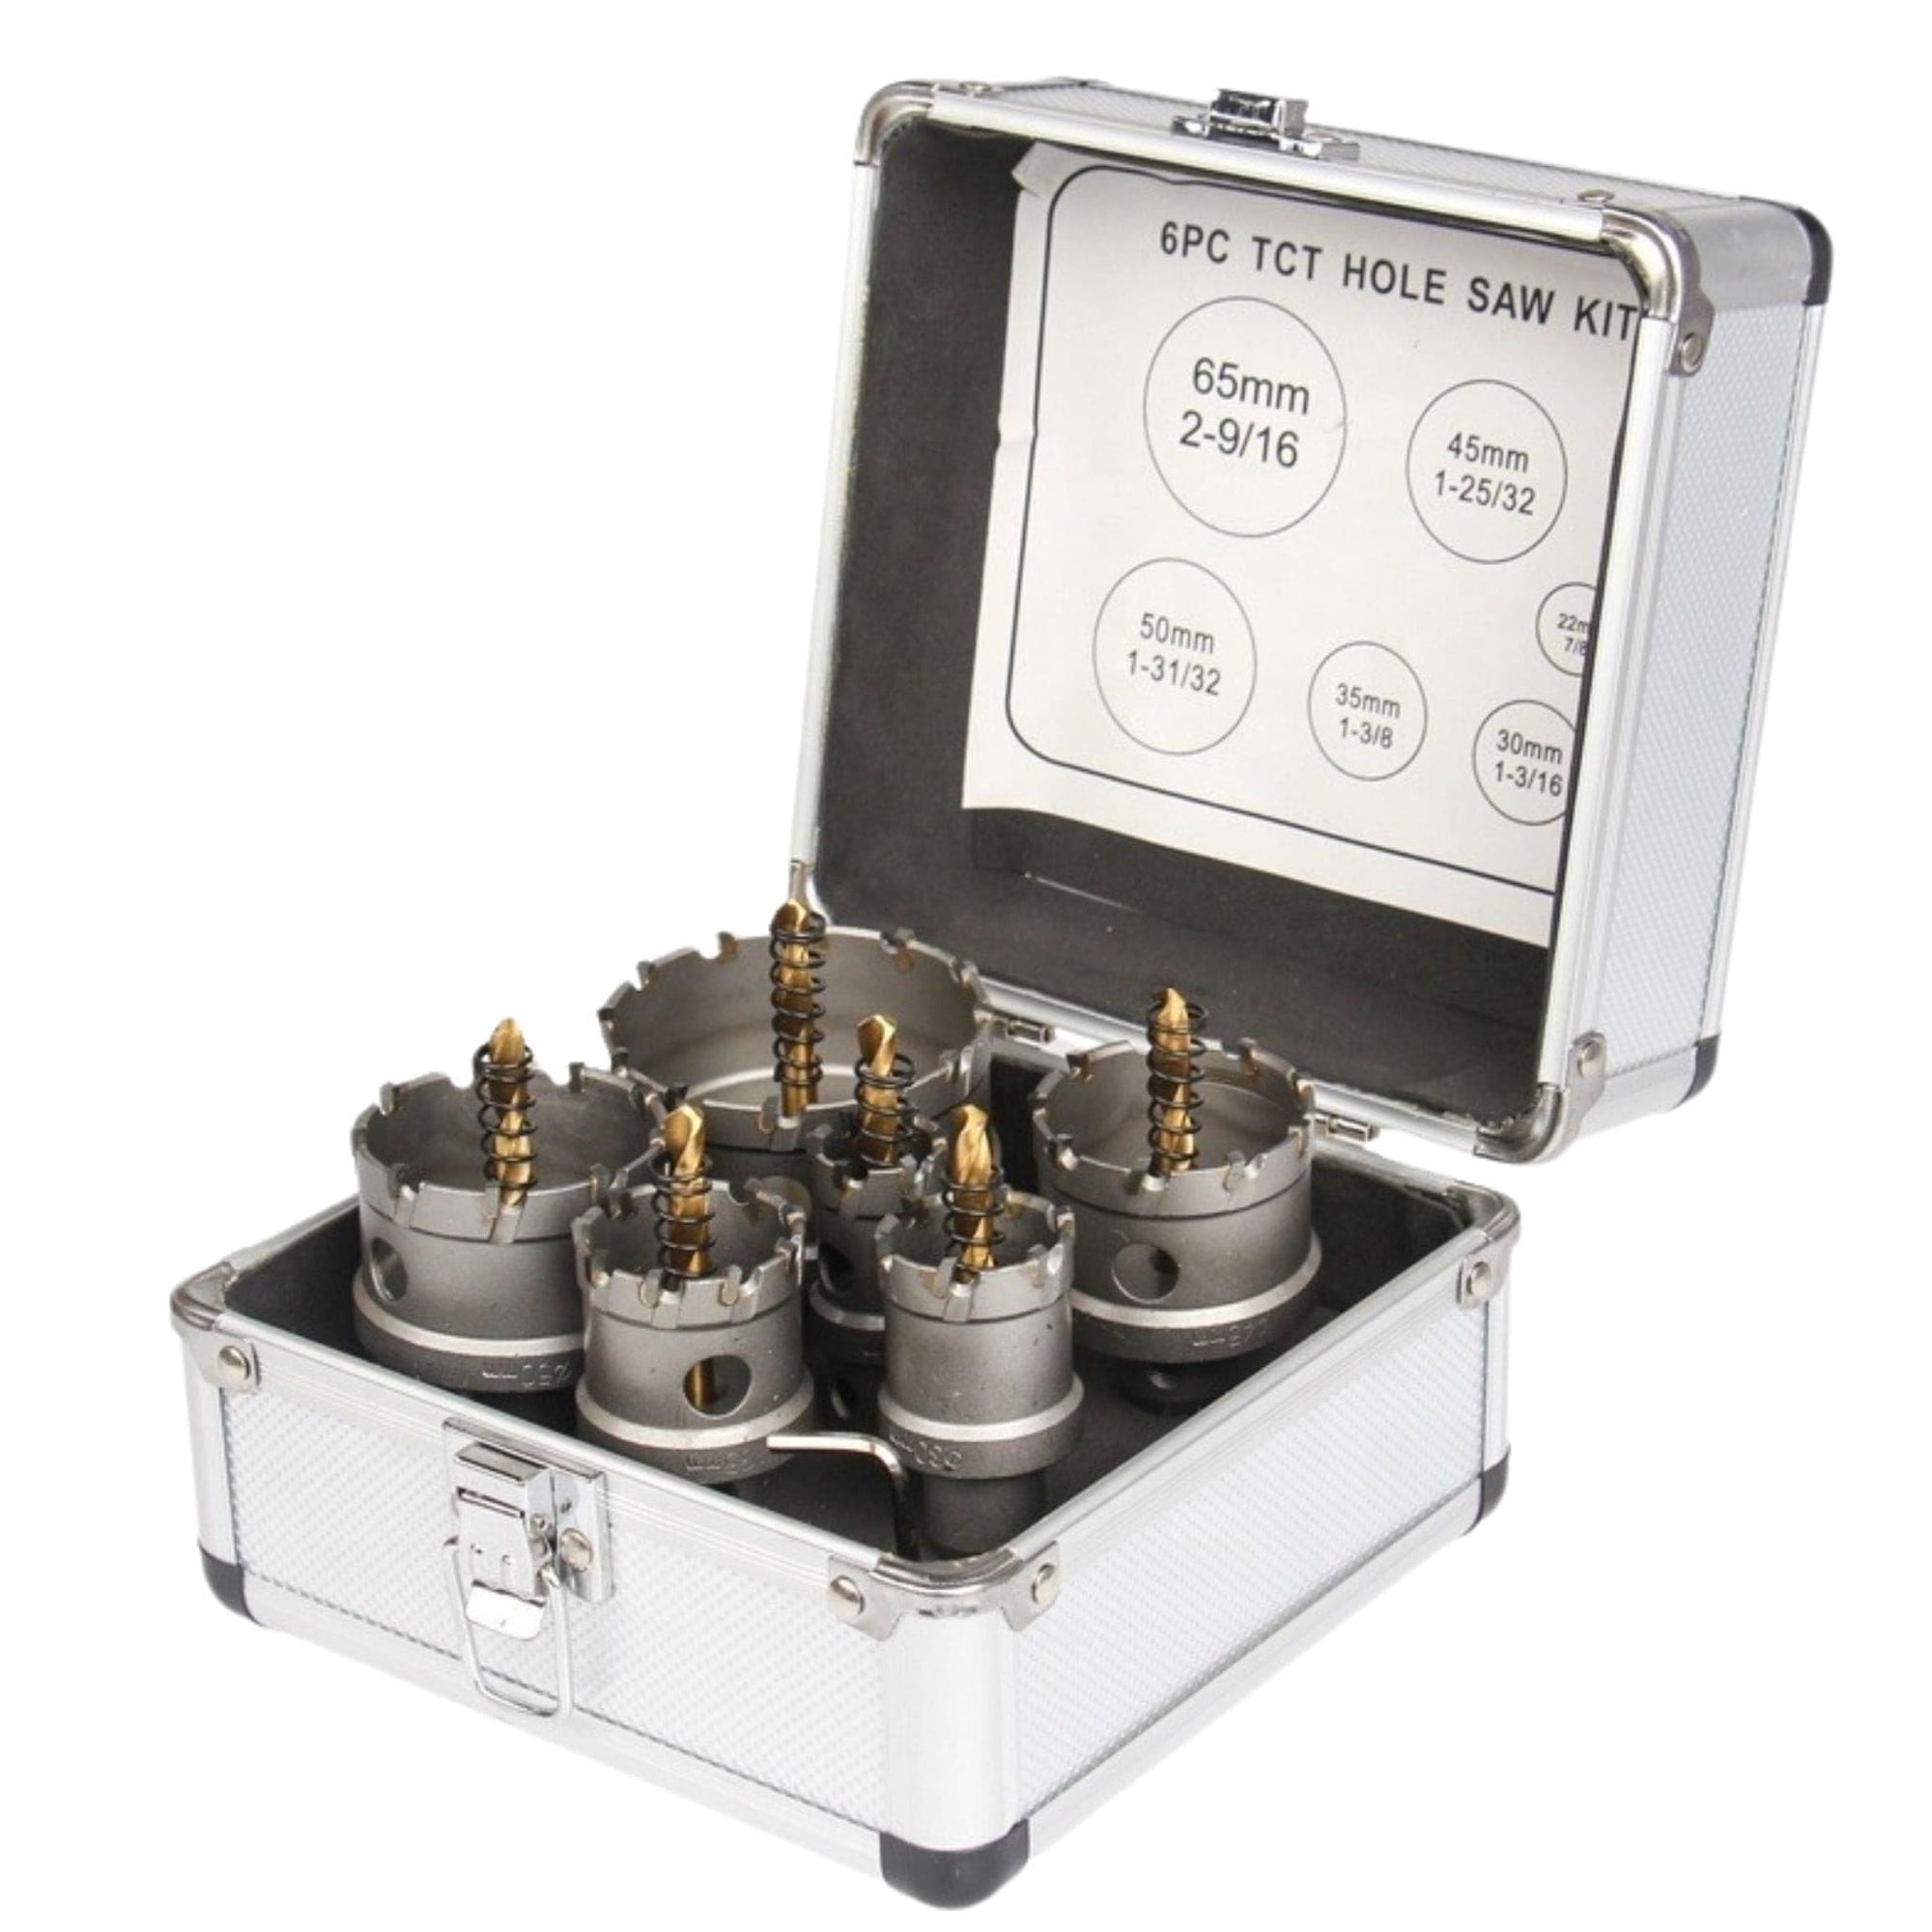 6 Piece Hole Saw Kit for Metal and Stainless Steel - South East Clearance Centre